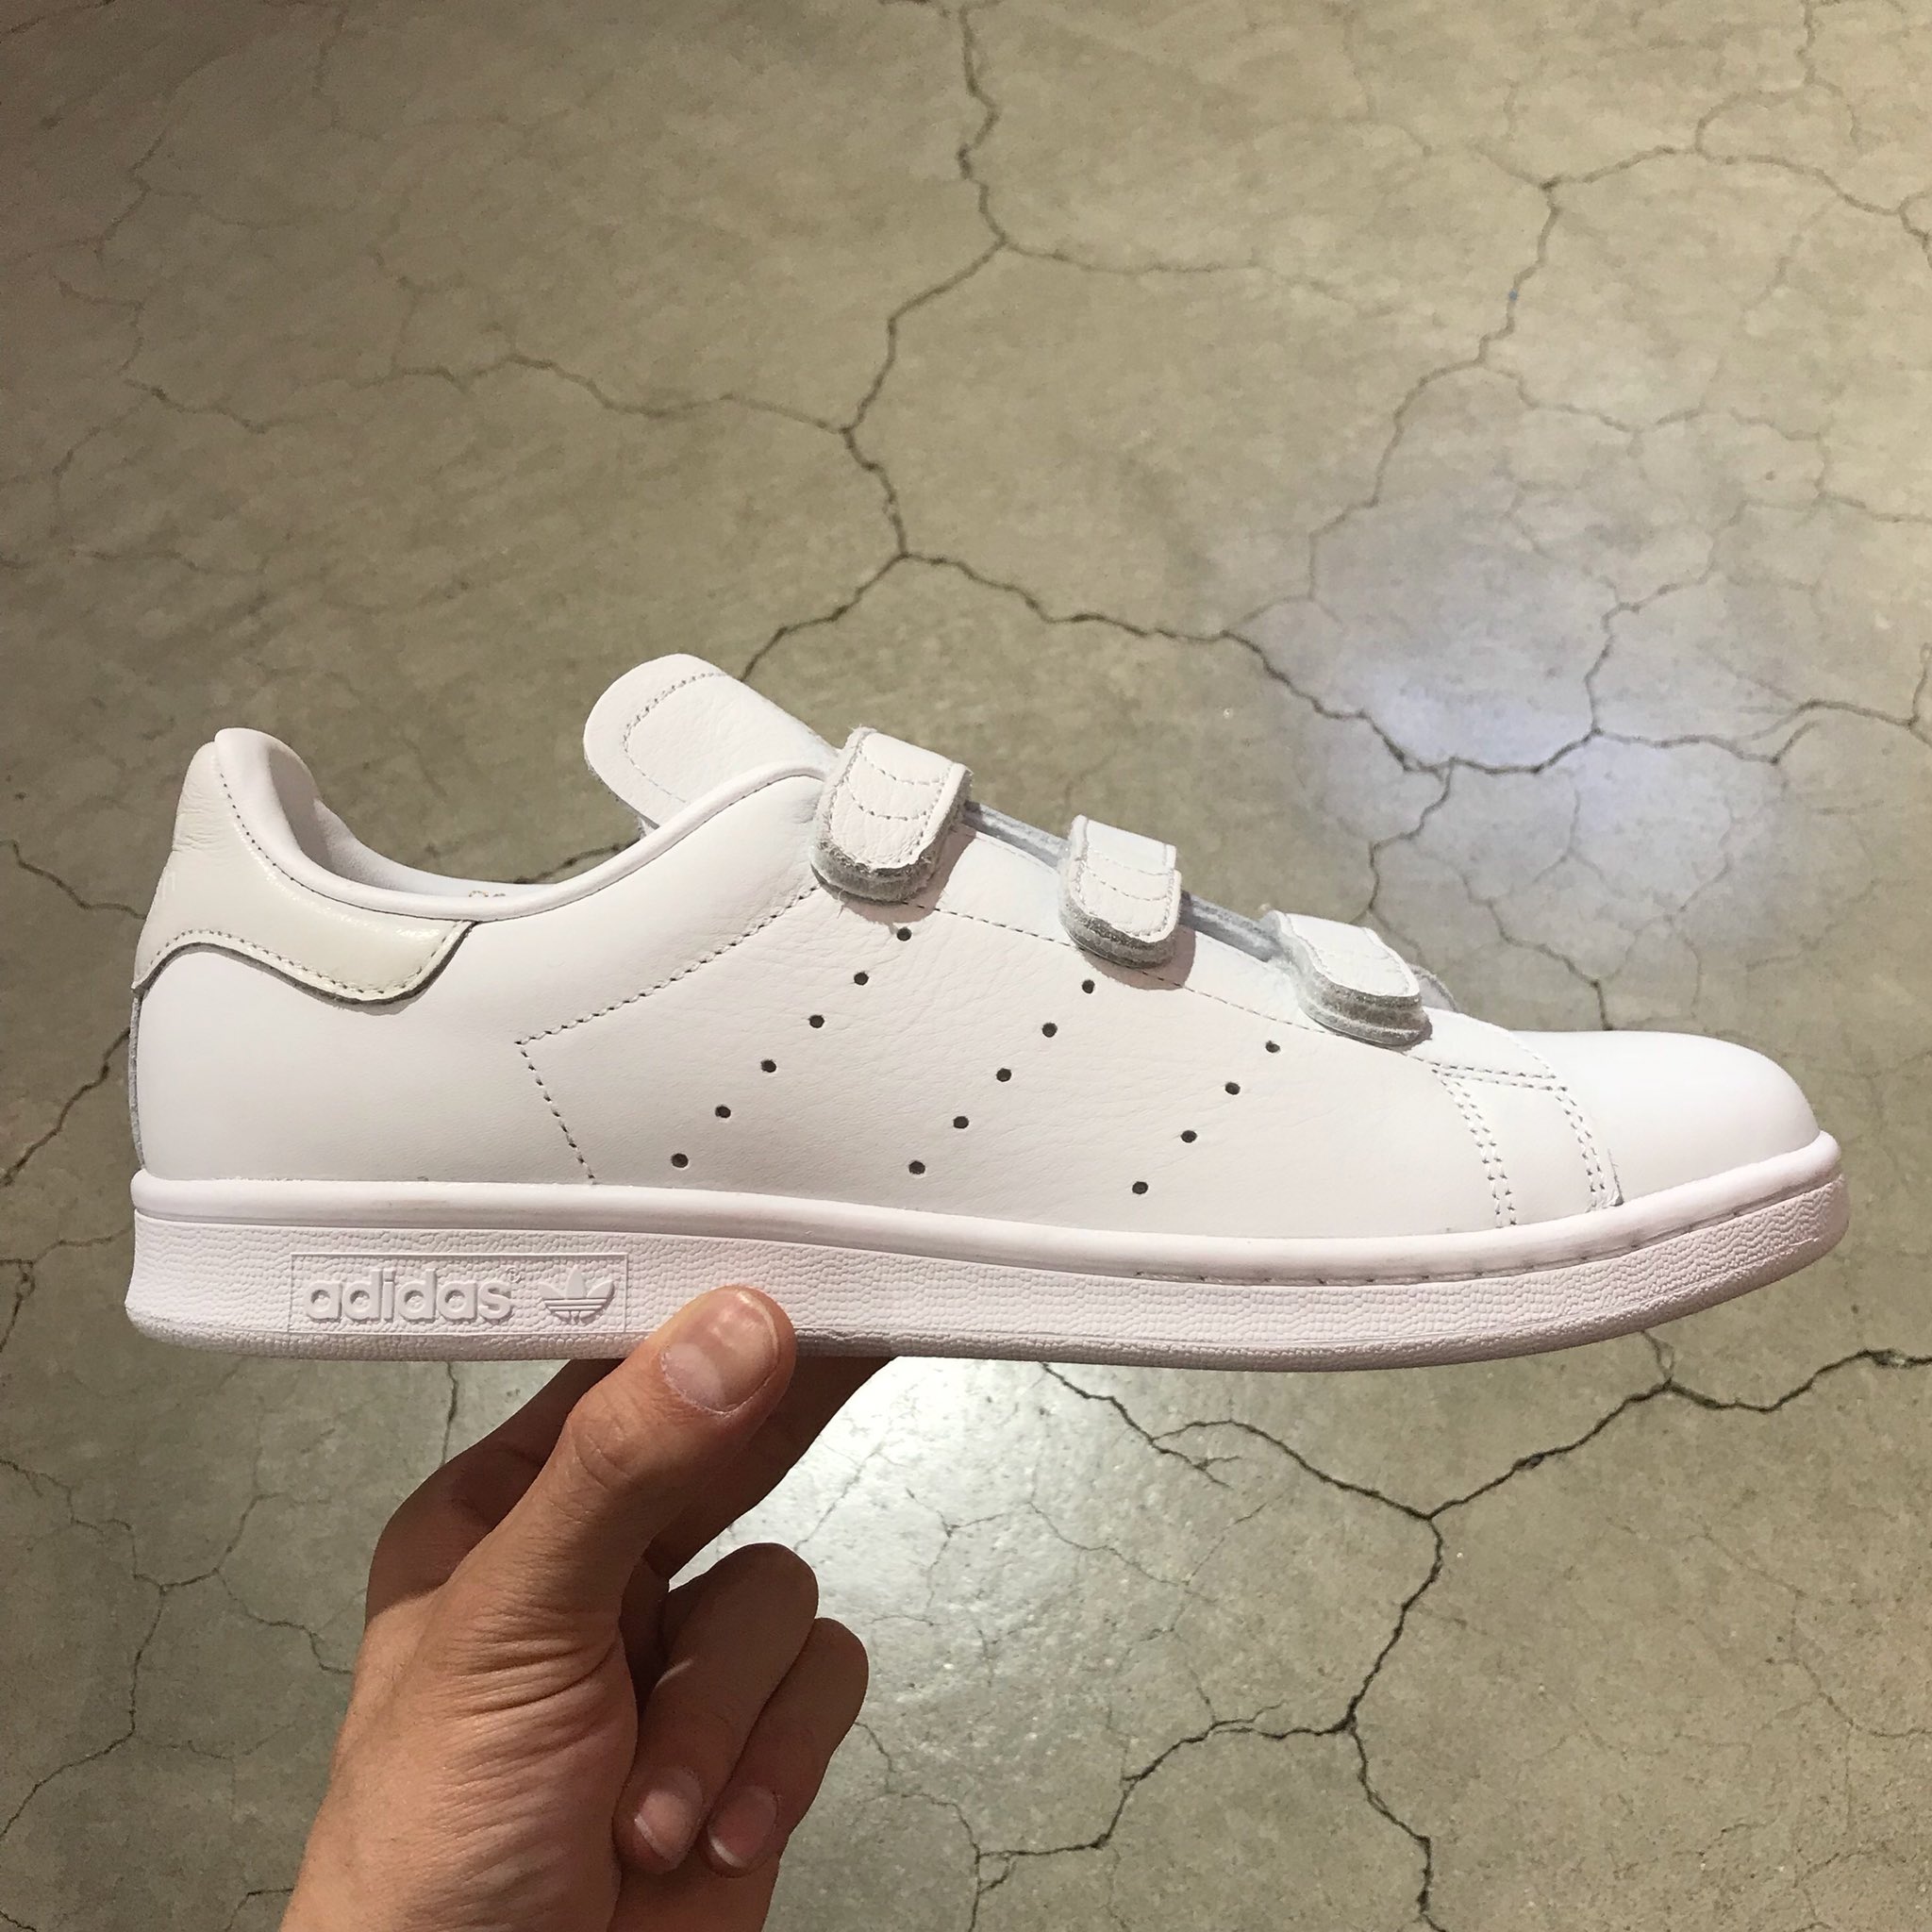 precoz Pobreza extrema Tercero CHAPTER OFFICIAL en Twitter: "【CHAPTER原宿店】 4/14 New release STAN SMITH CF  CQ2632 ¥15,000-(+tax) #adidas #stansmith #stansmithcf #sneaker #アディダス  #スタンスミス #スニーカー https://t.co/XgffgfkqP5" / Twitter